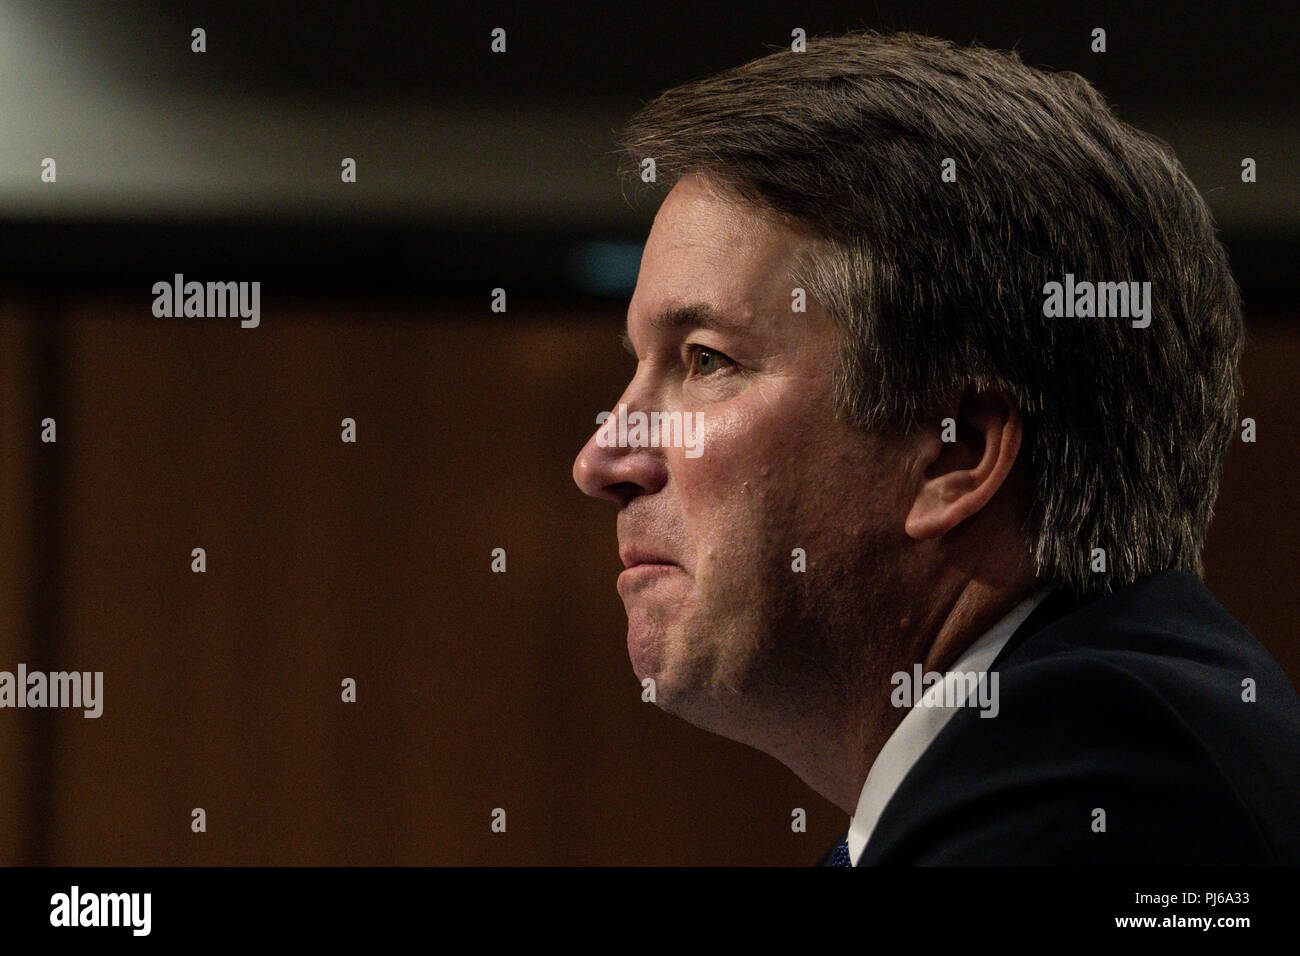 Washington, DC, USA. 4th Sep, 2018. U.S. Supreme Court Associate Justice nominee Brett Kavanaugh makes his opening statements during his confirmation hearing before the Senate Judiciary Committee in the Hart Senate Office Building in Washington, DC on Sept 4, 2018. Credit: Ken Cedeno/ZUMA Wire/Alamy Live News Stock Photo